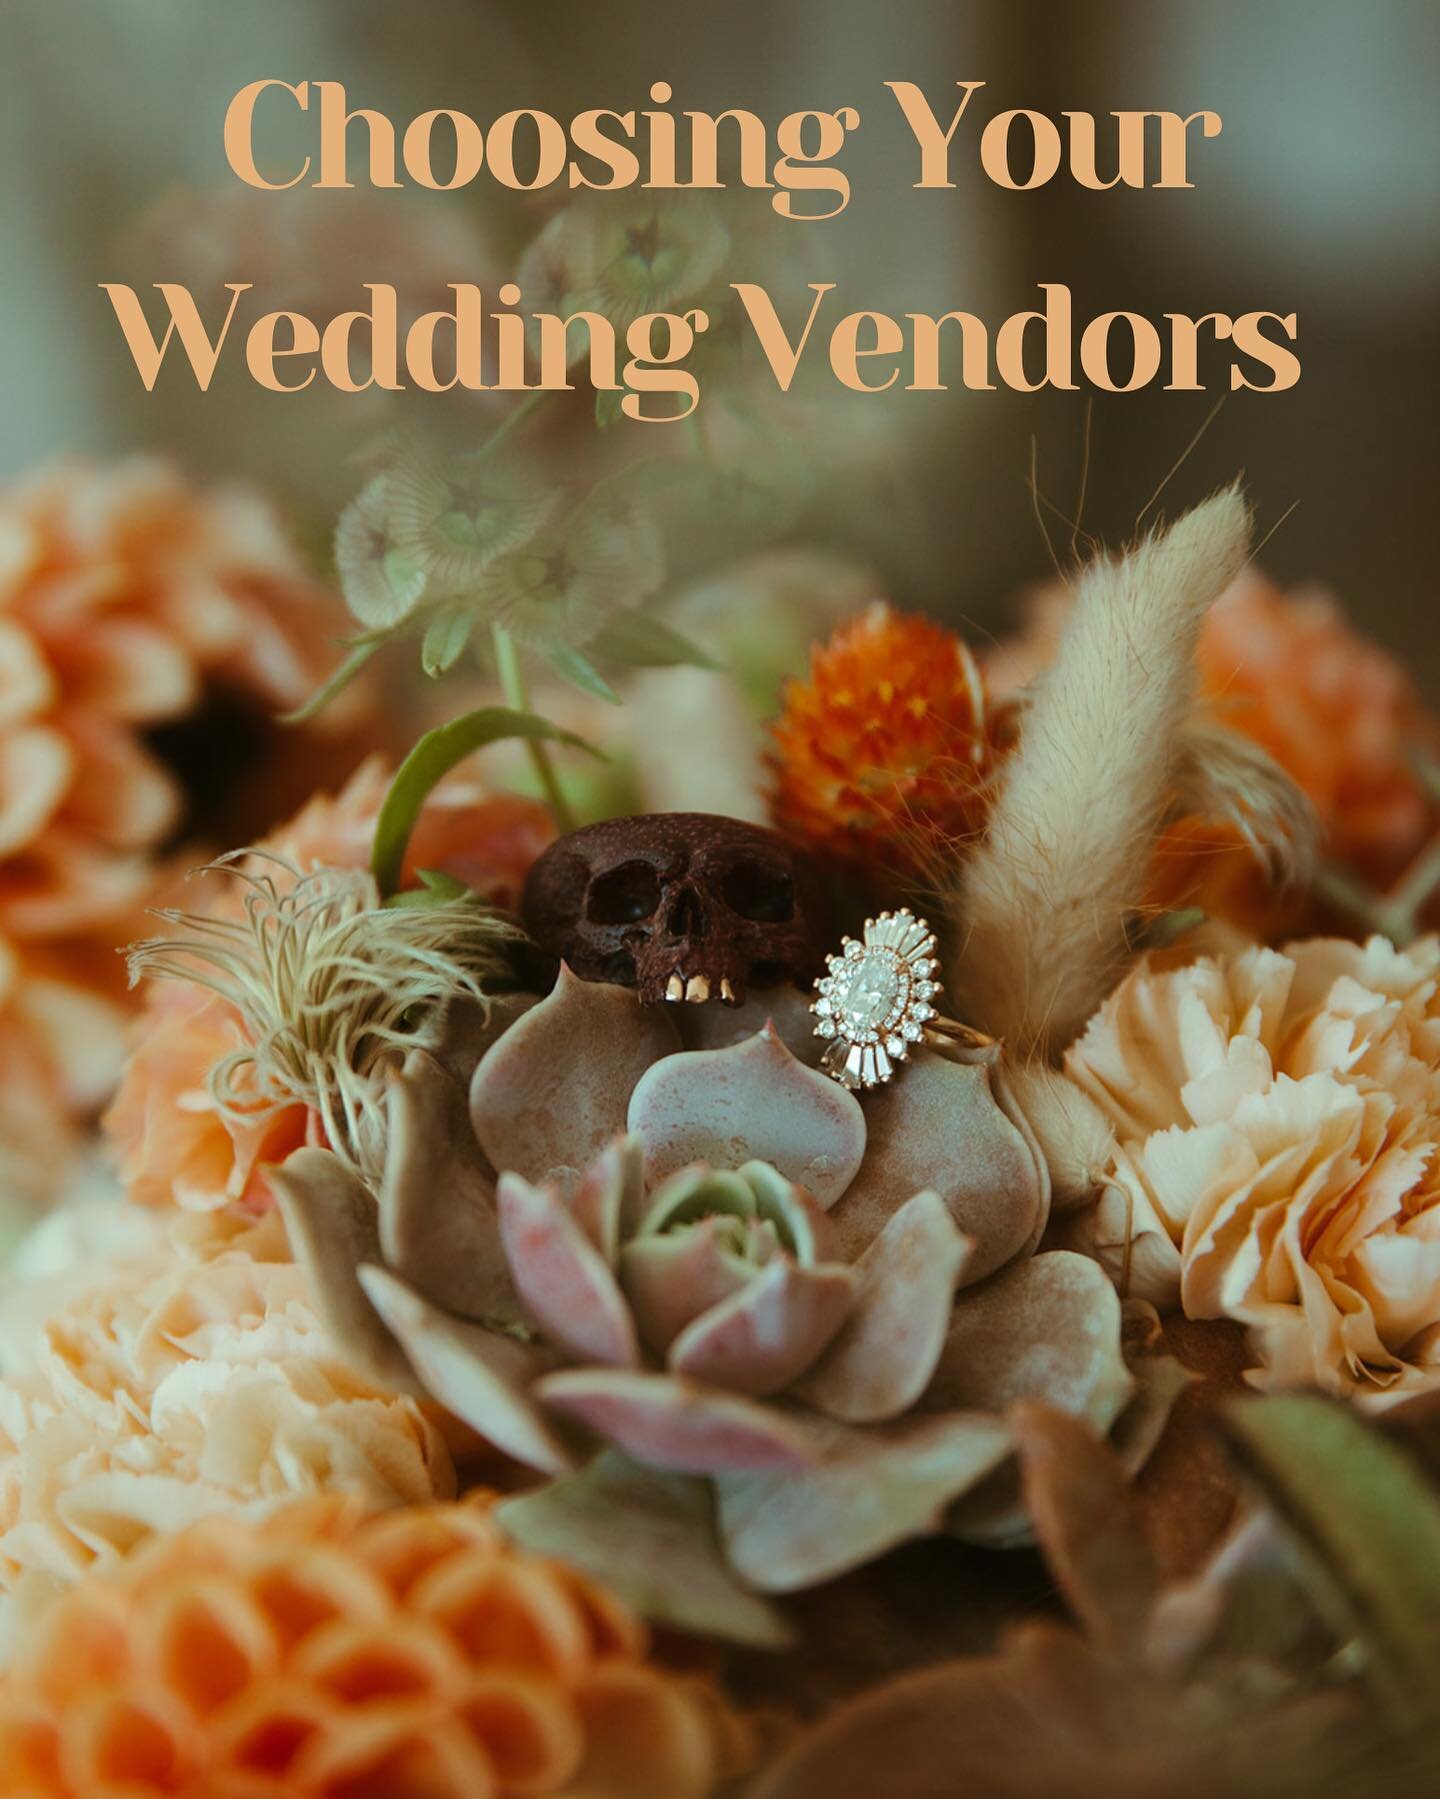 Choosing wedding vendors is about two big things, the EXPERIENCE and the VISUALS. We've put together a few key questions you should ask yourself when it comes to selecting vendors. Some are obvious, some less so. We got married almost 11 years ago an